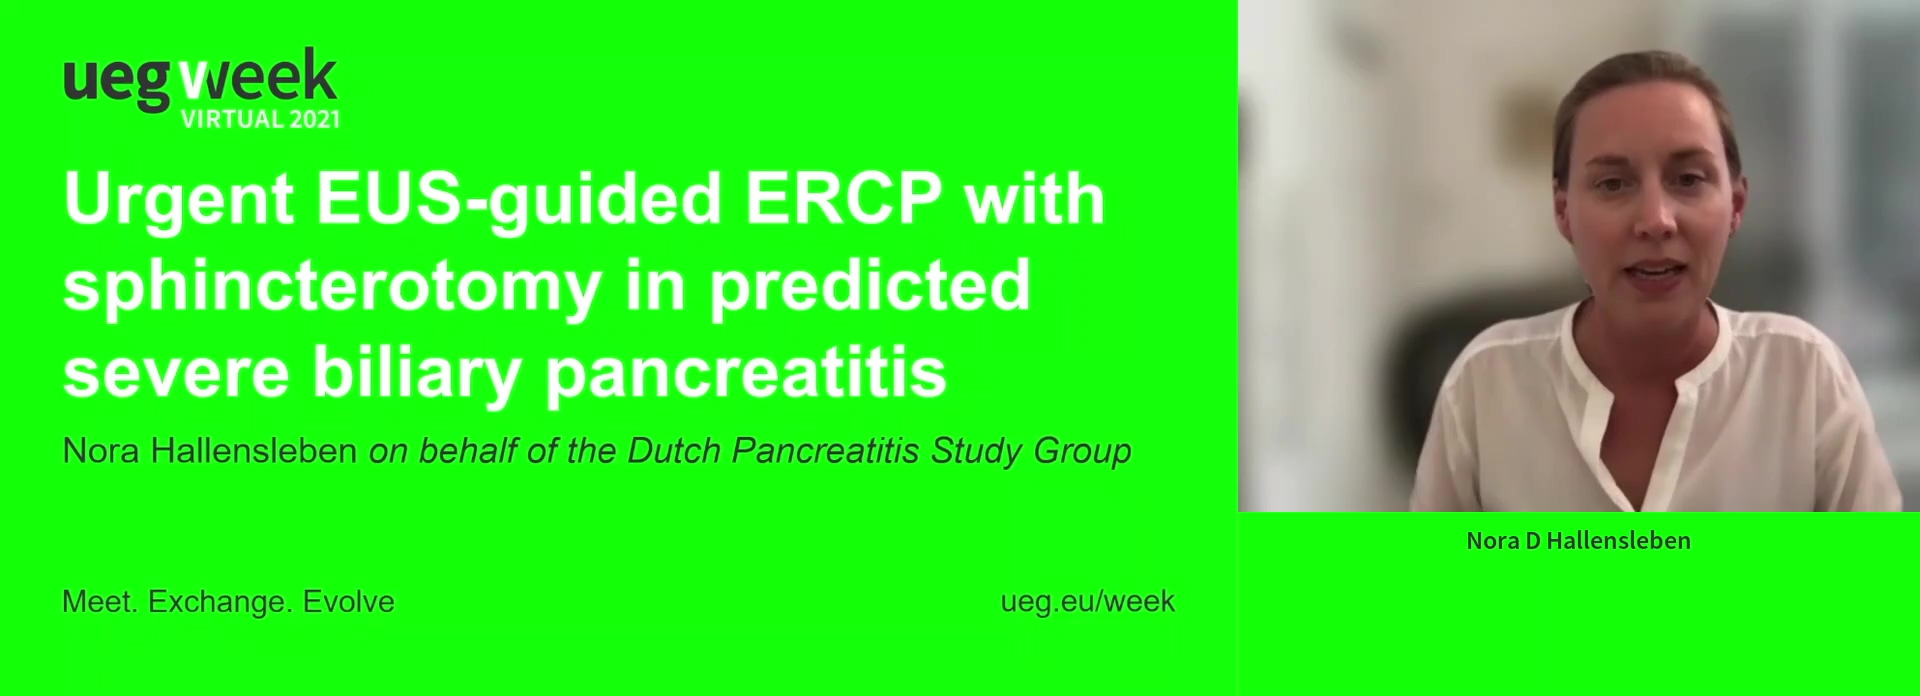 URGENT ENDOSCOPIC ULTRASOUND-GUIDED ERC IN PREDICTED SEVERE ACUTE BILIARY PANCREATITIS (APEC-2): A MULTICENTER PROSPECTIVE STUDY